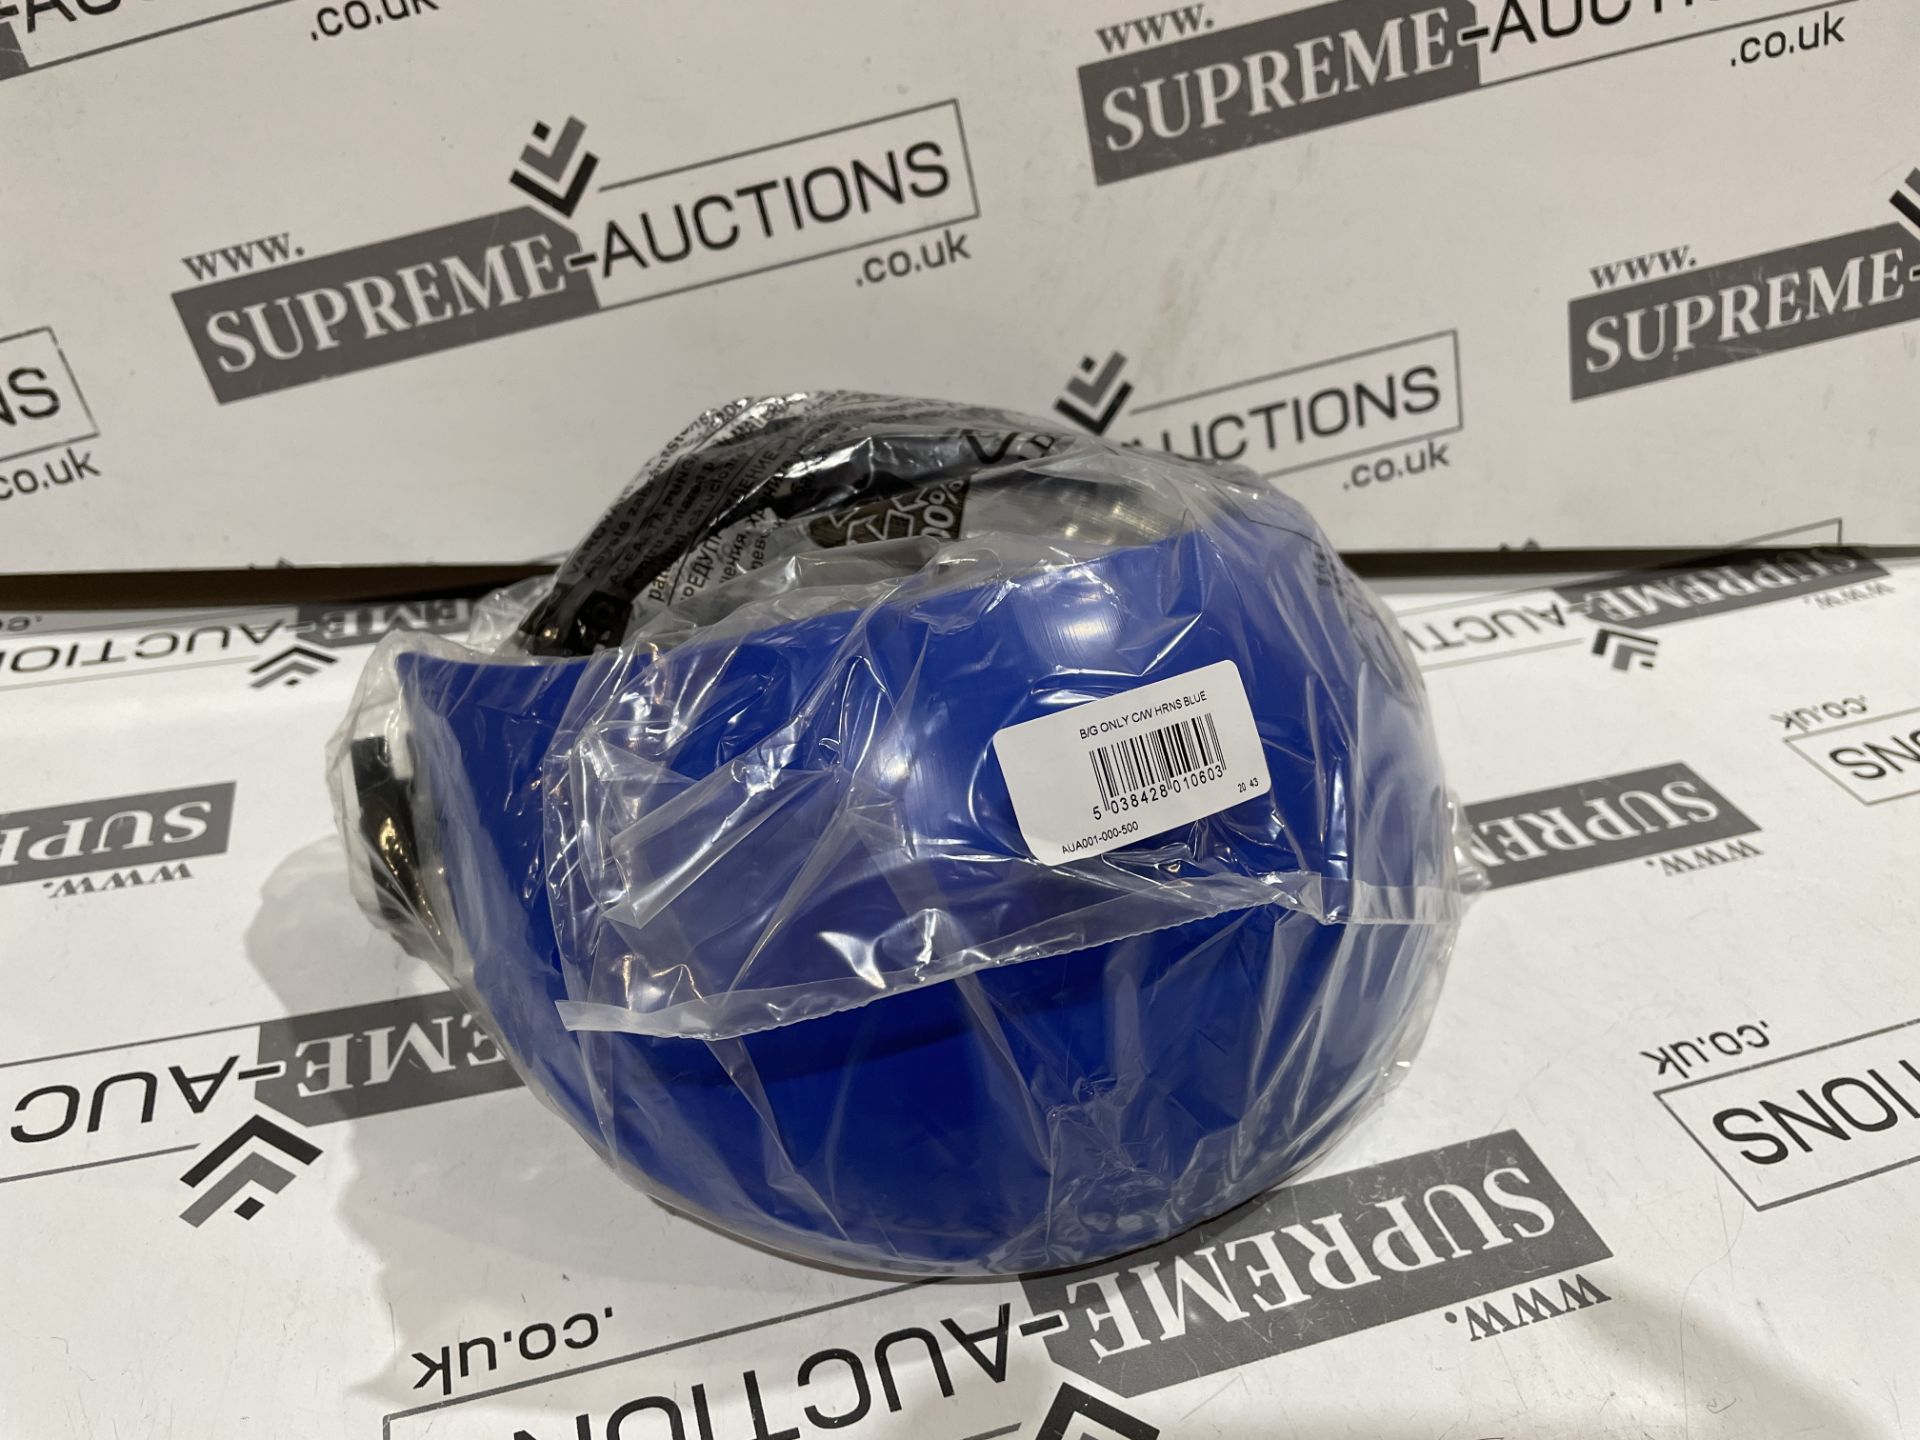 40 X BRAND NEW PROFESSIONAL HARD HATS (COLOURS MAY VARY) R16-7